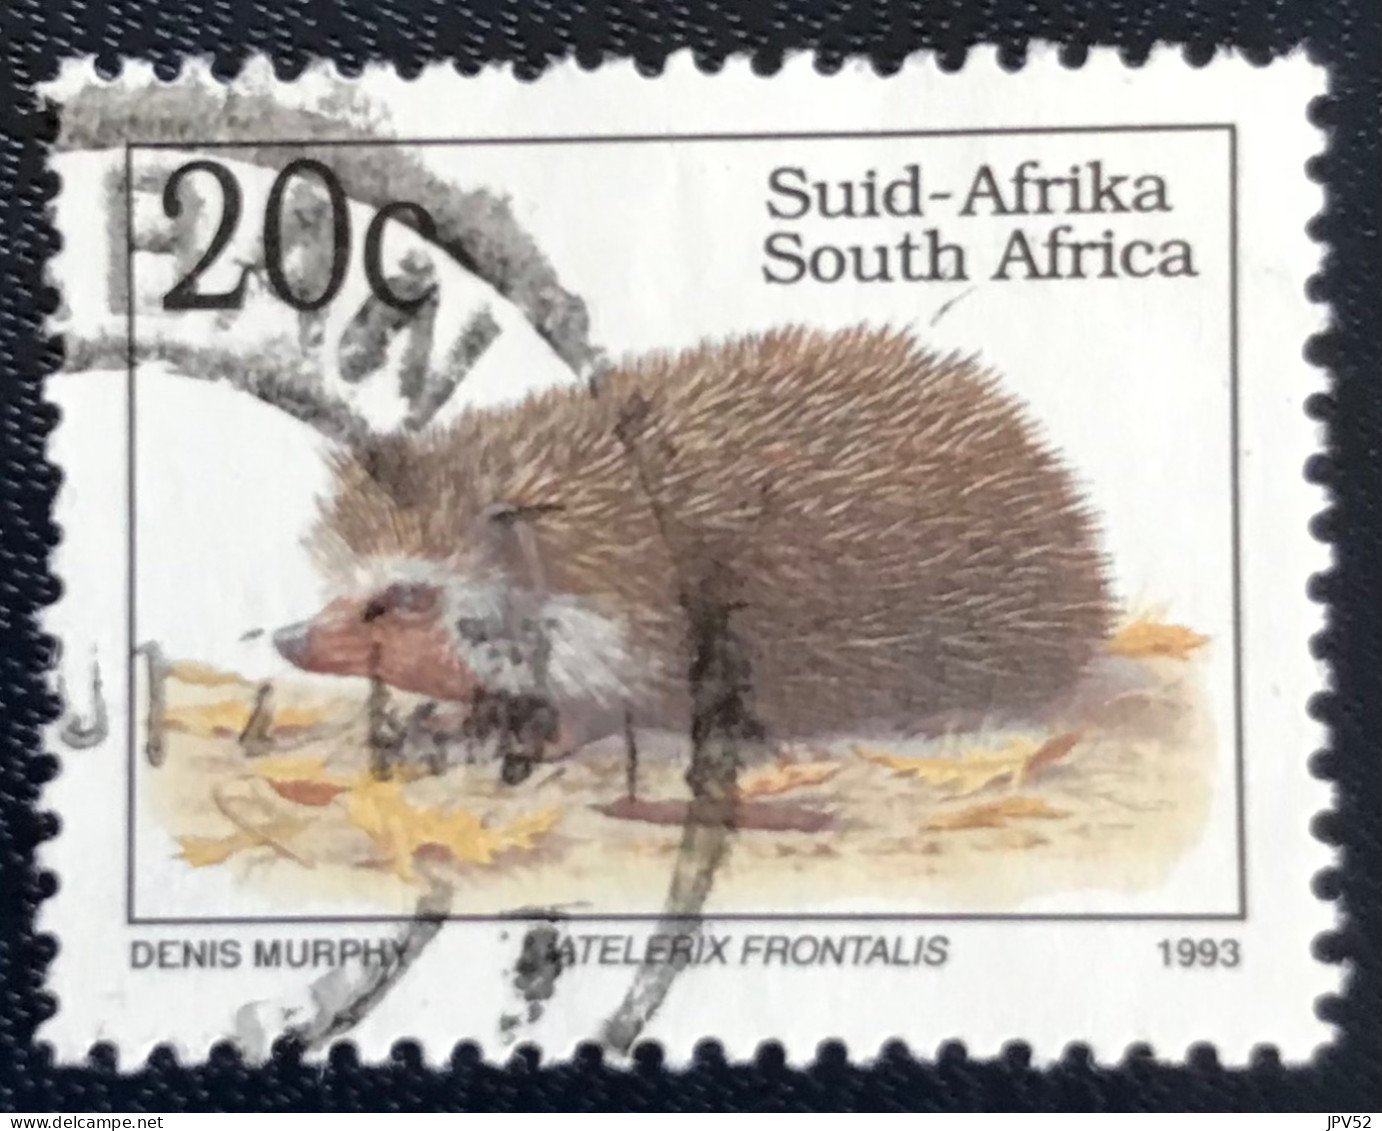 RSA - South Africa - Suid-Afrika  - C18/6 - 1995 - (°)used - Michel 894IA - Bedreigde Dieren - Used Stamps